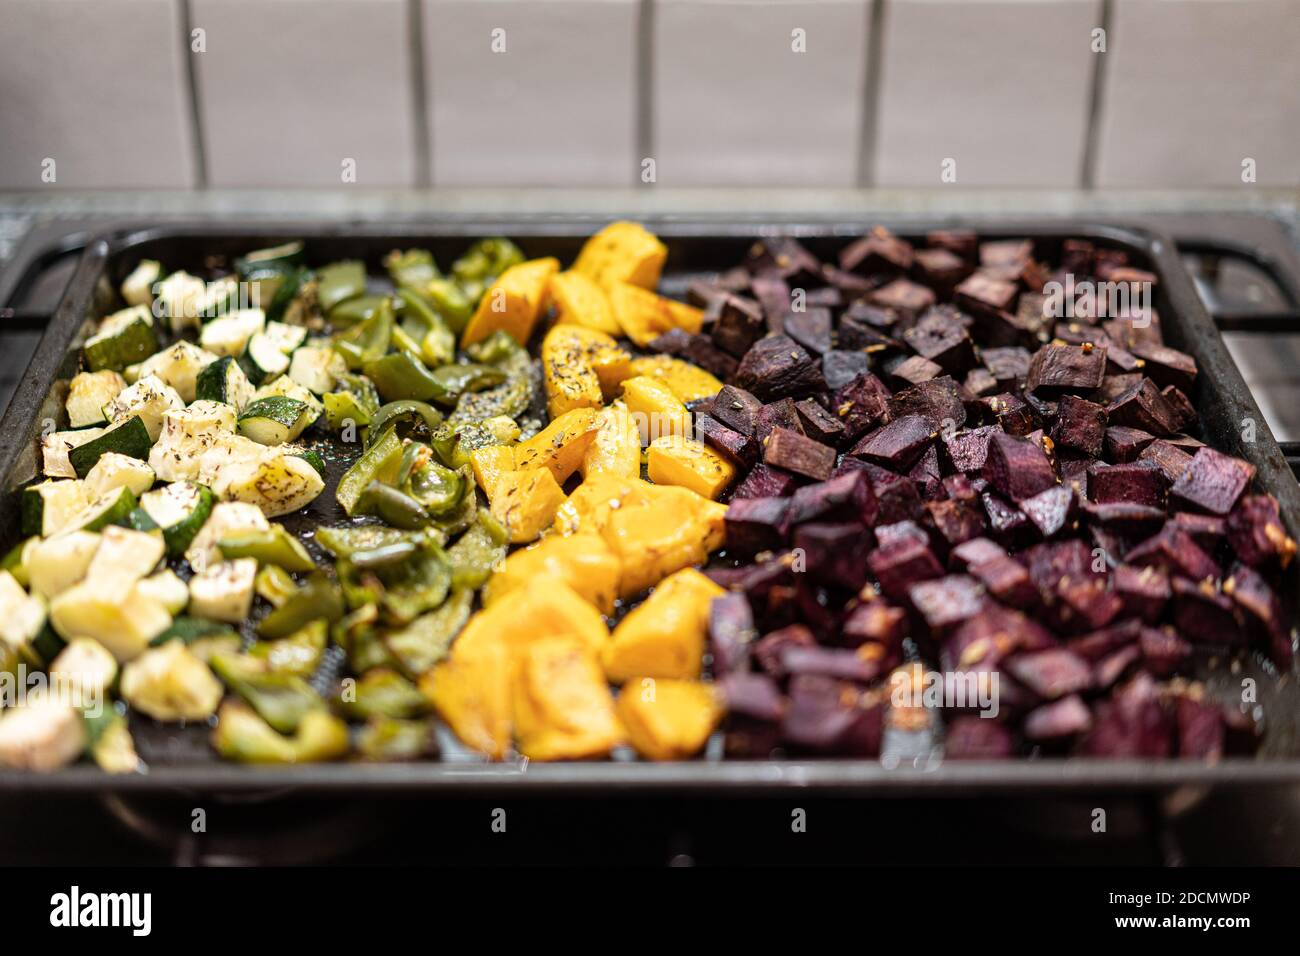 Close-up of oven-baked vegetables on black baking tray. Sliced green peperoni, yellow sweet potatoes, beetroot, green zuchinni with spice and pepper. Stock Photo